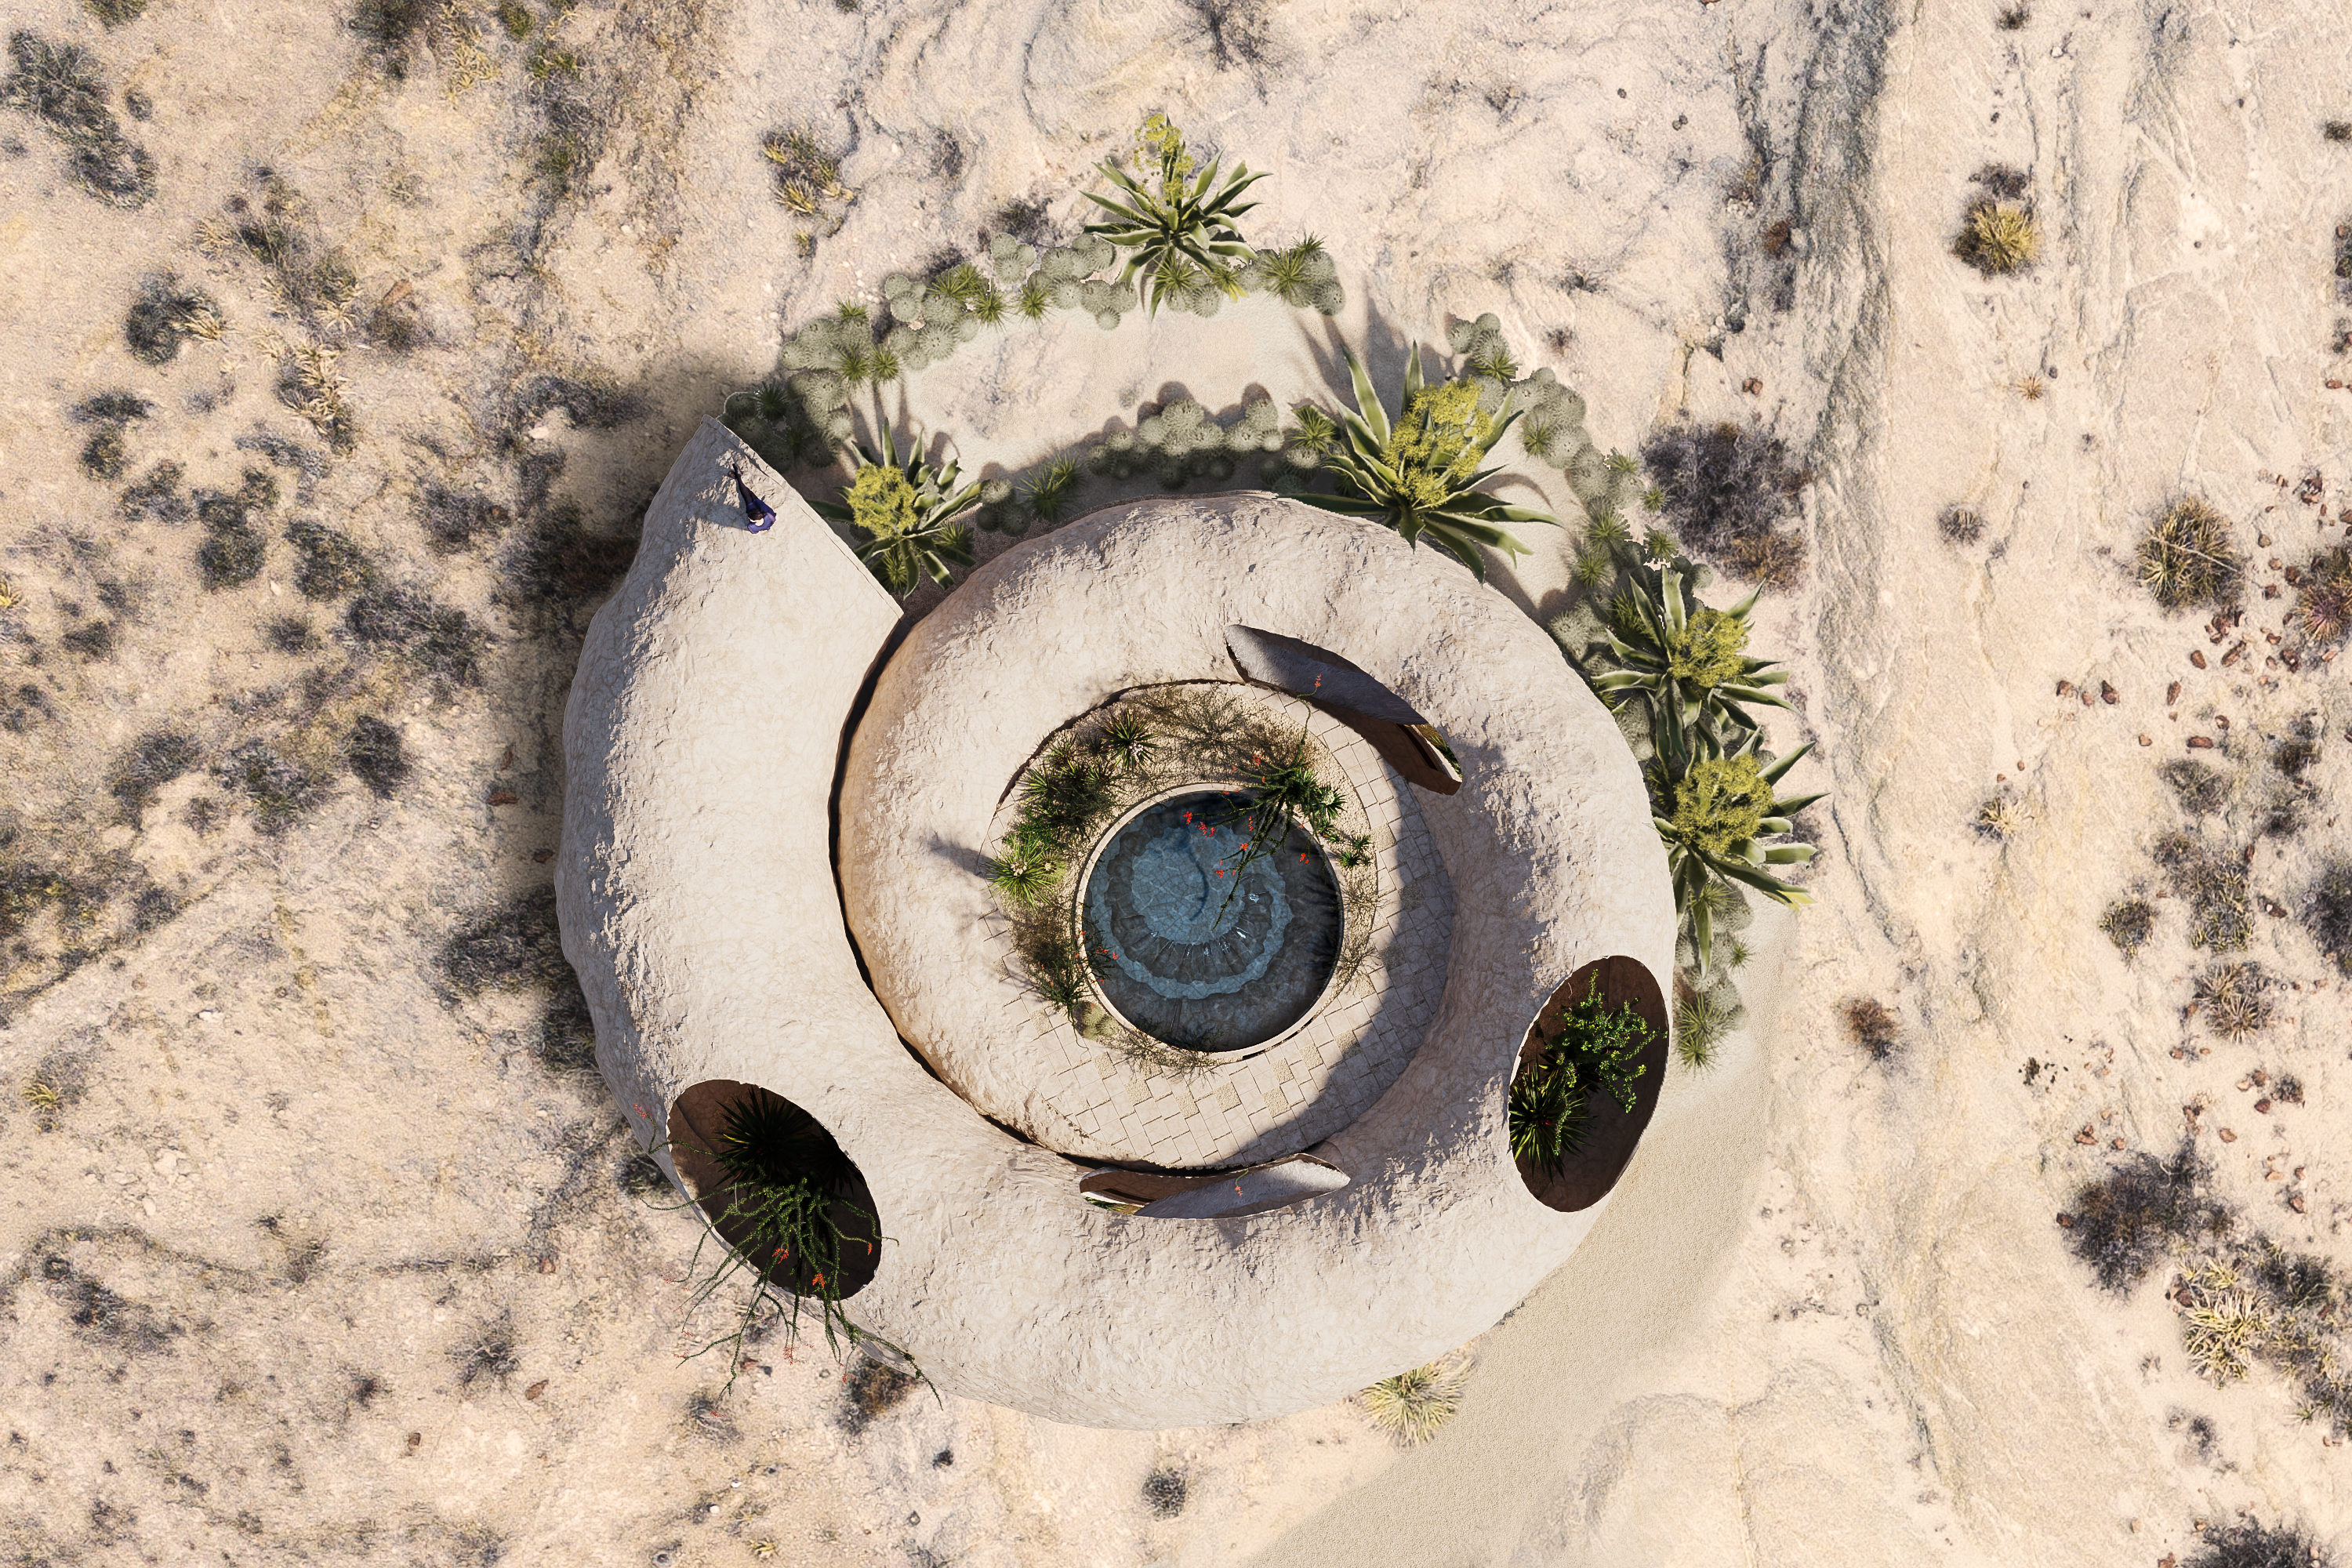 Livable Giant Fossilized Snail in the Desert by Diego Z. for Airbnb OMG! Fund